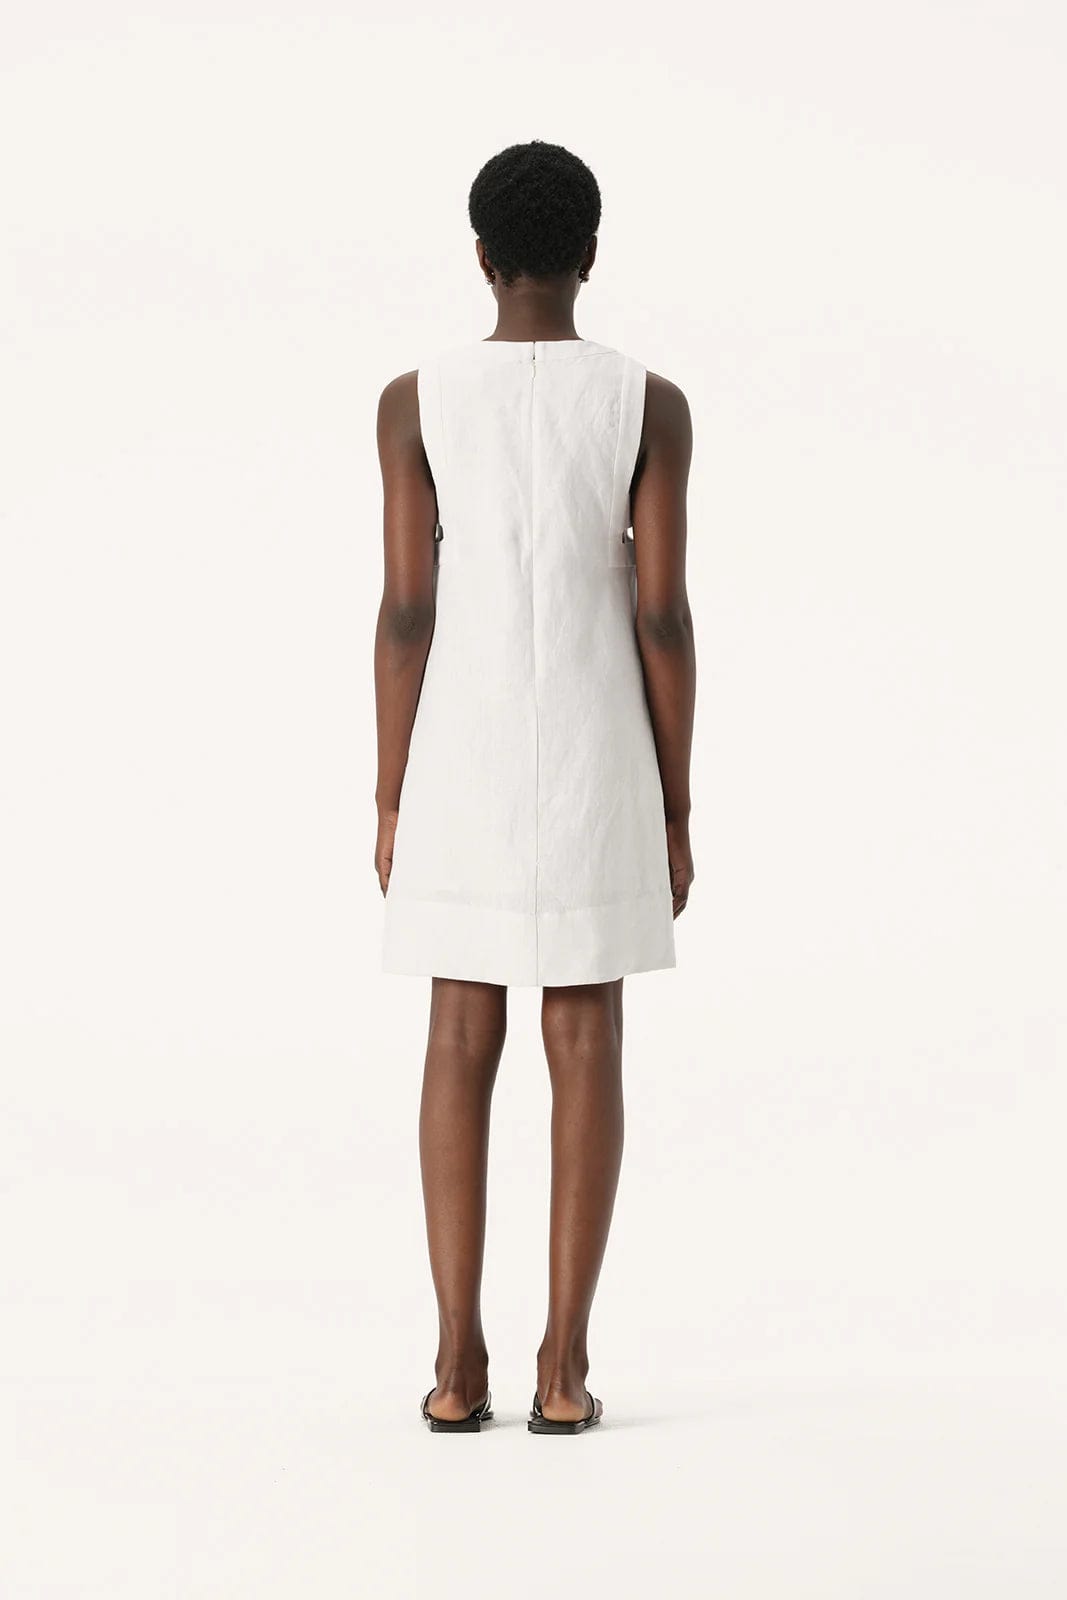 Elka Collective Dresses - Casual Elka Collective | Eze Dress - White